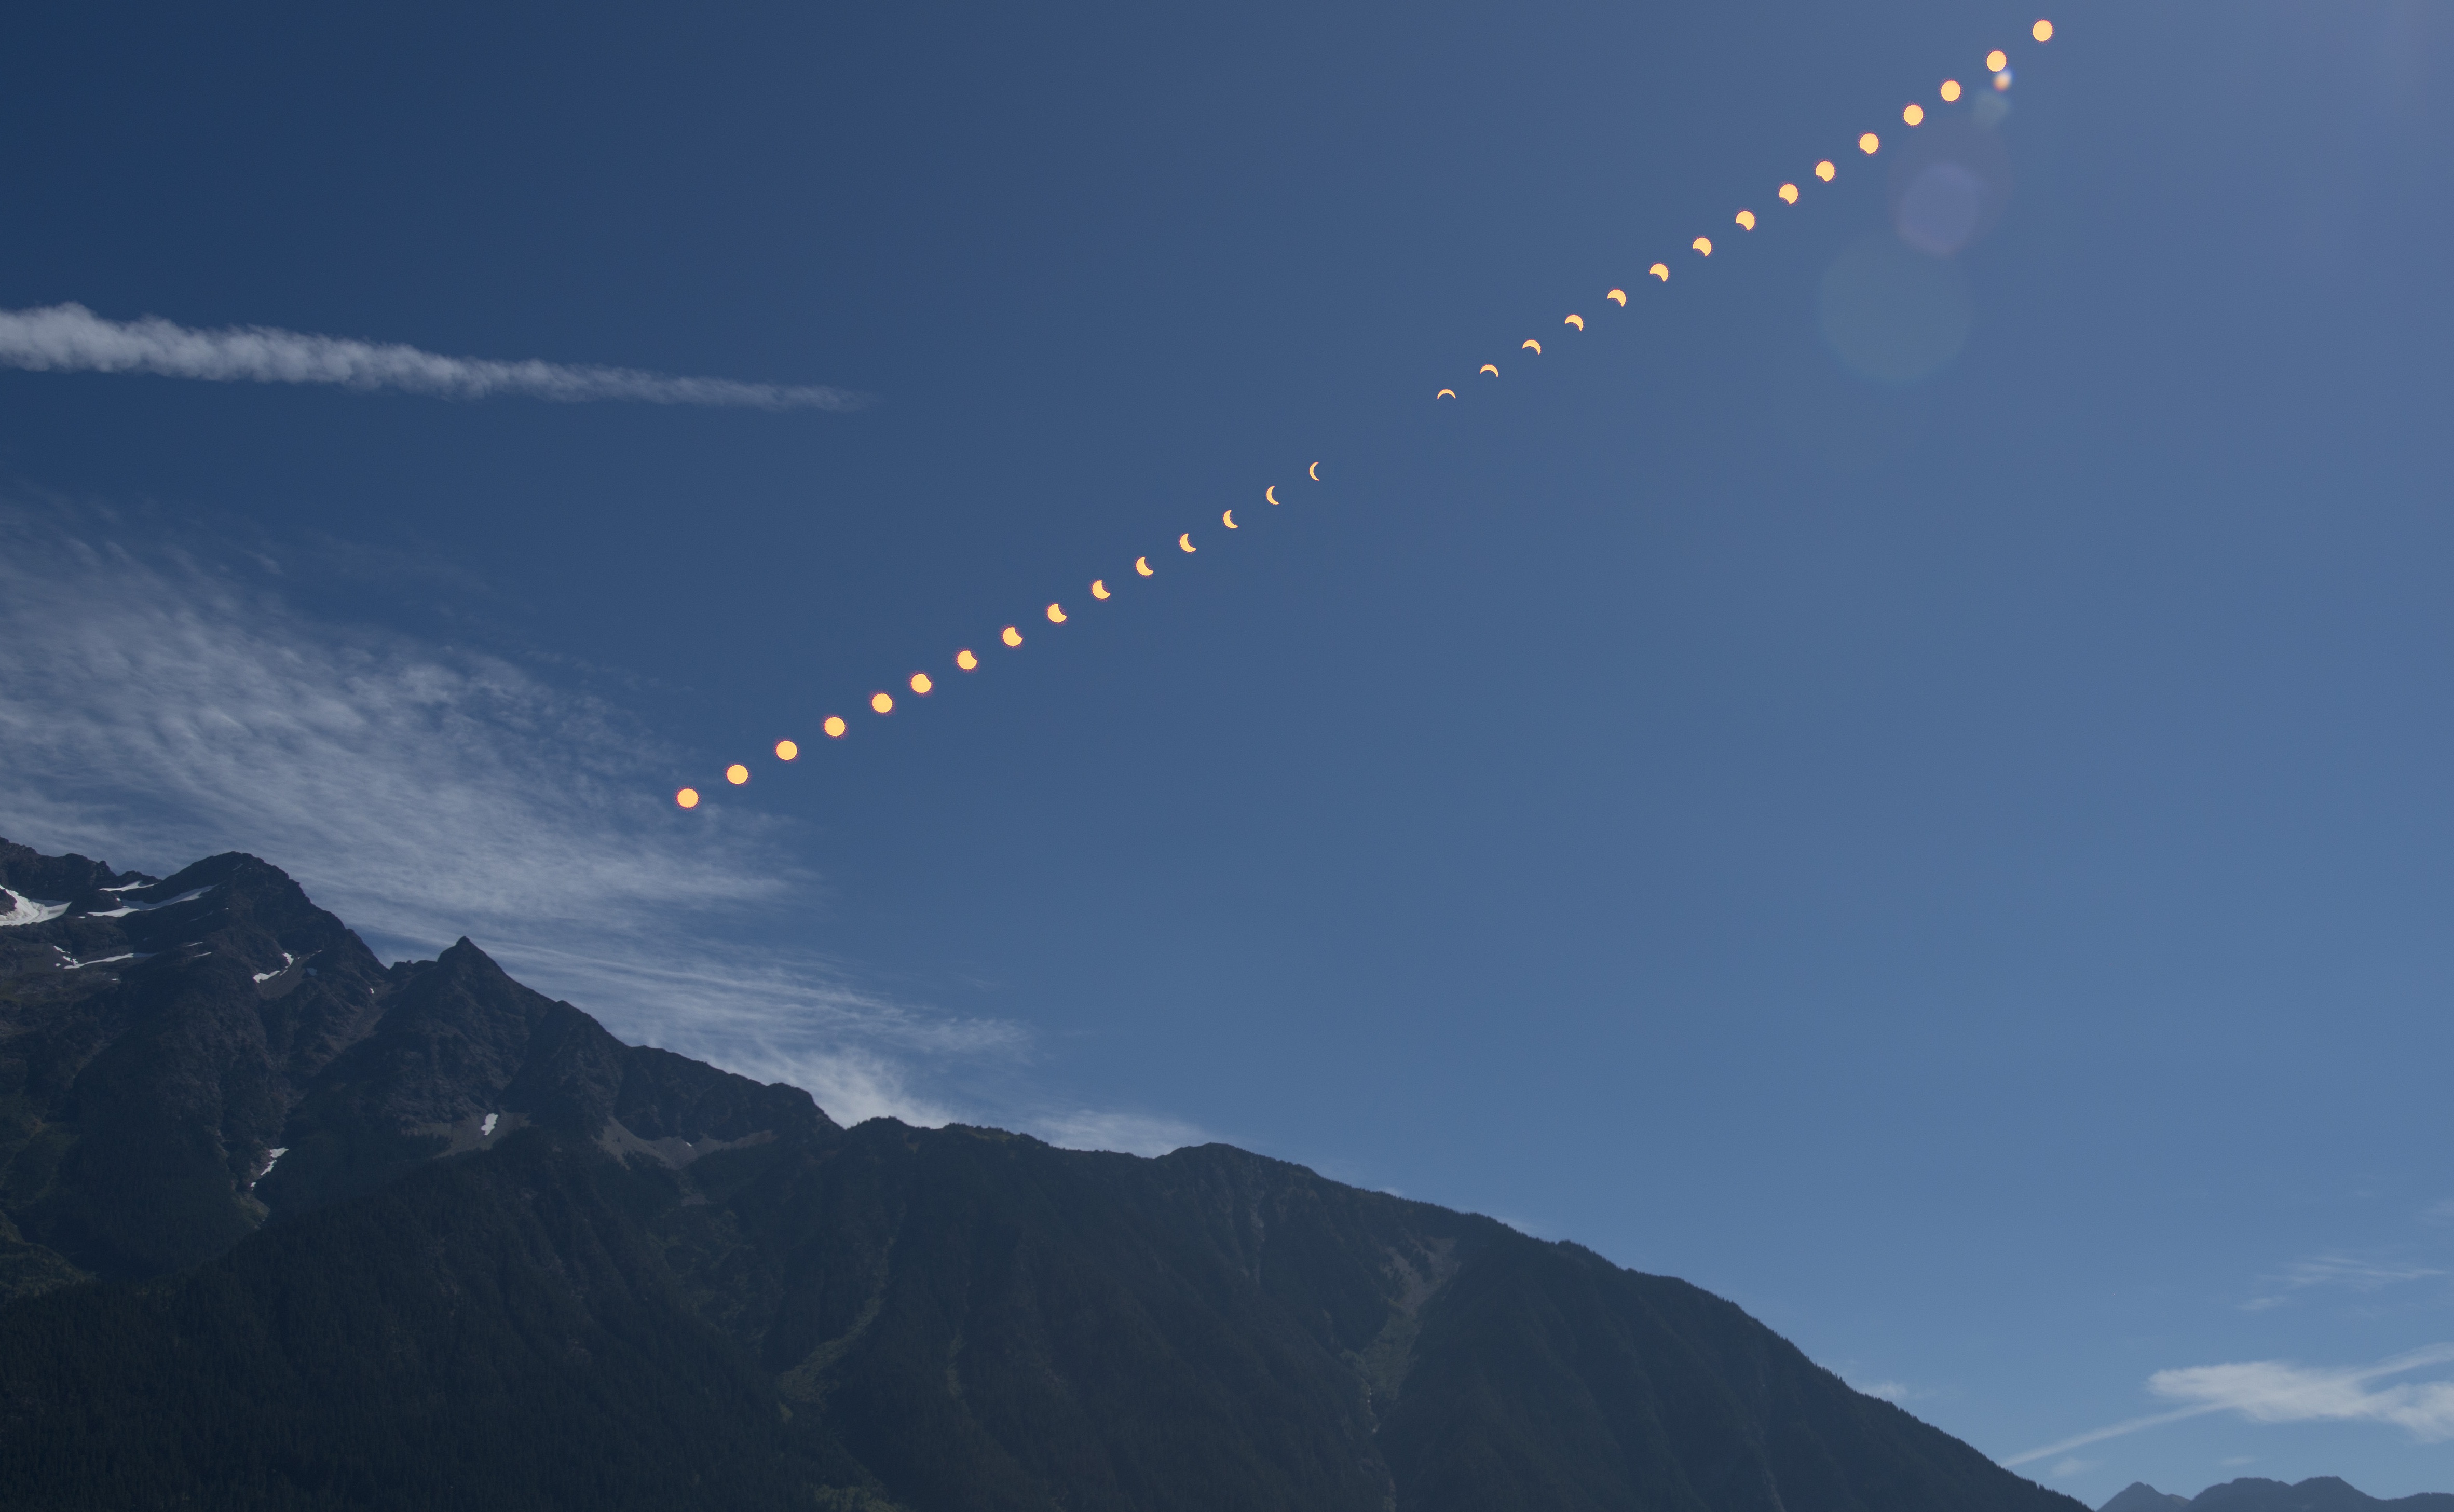 The phases of the sun as it is transited by the moon composited over mountain scenery